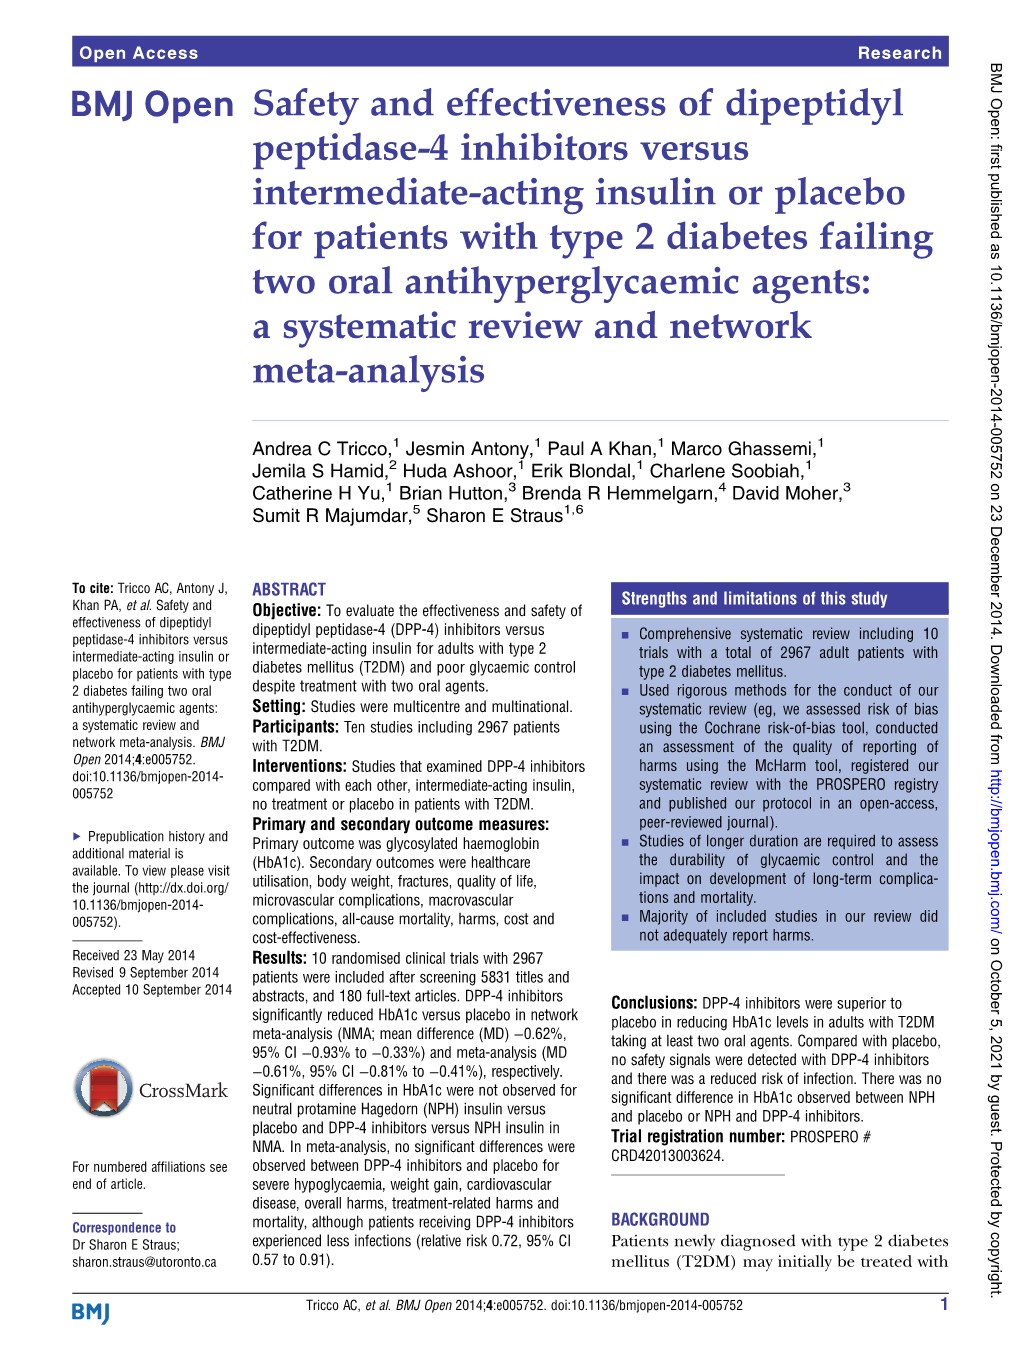 Safety and Effectiveness of Dipeptidyl Peptidase-4 Inhibitors Versus Intermediate-Acting Insulin Or Placebo for Patients with Ty